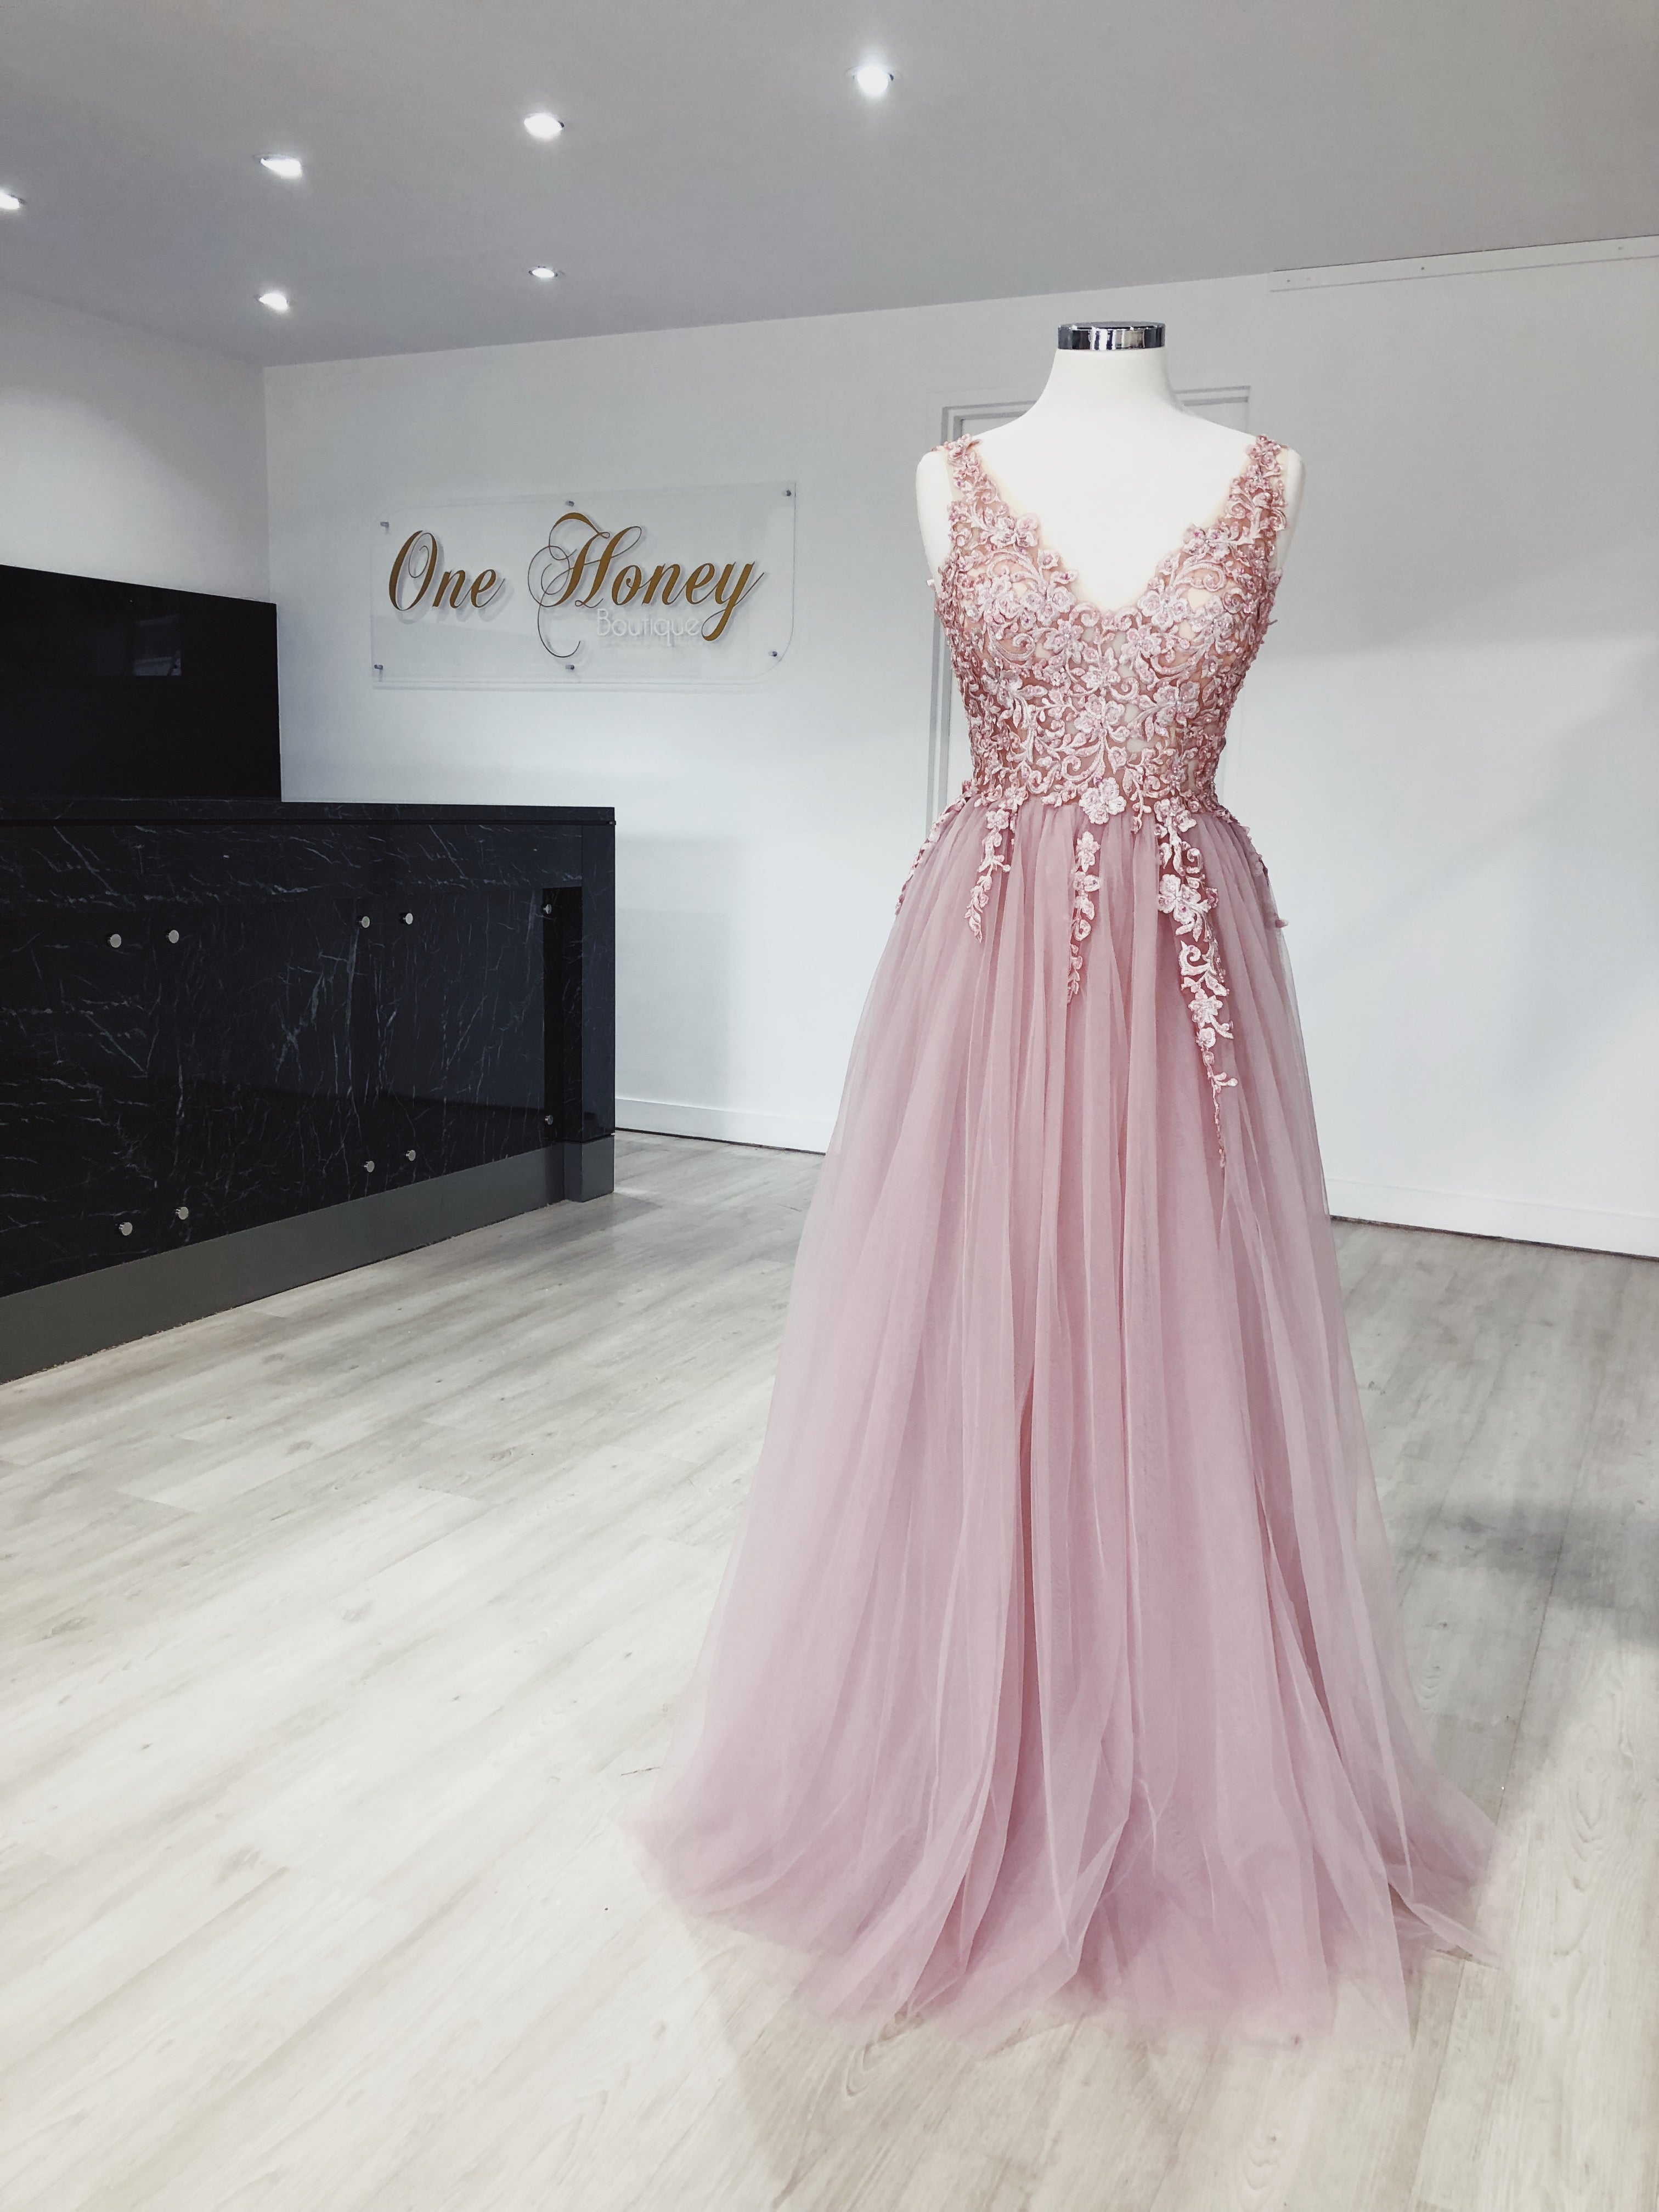 Honey Couture SKYLAR 3D Flowers Tulle Formal Gown Dress Honey Couture Custom$ AfterPay Humm ZipPay LayBuy Sezzle